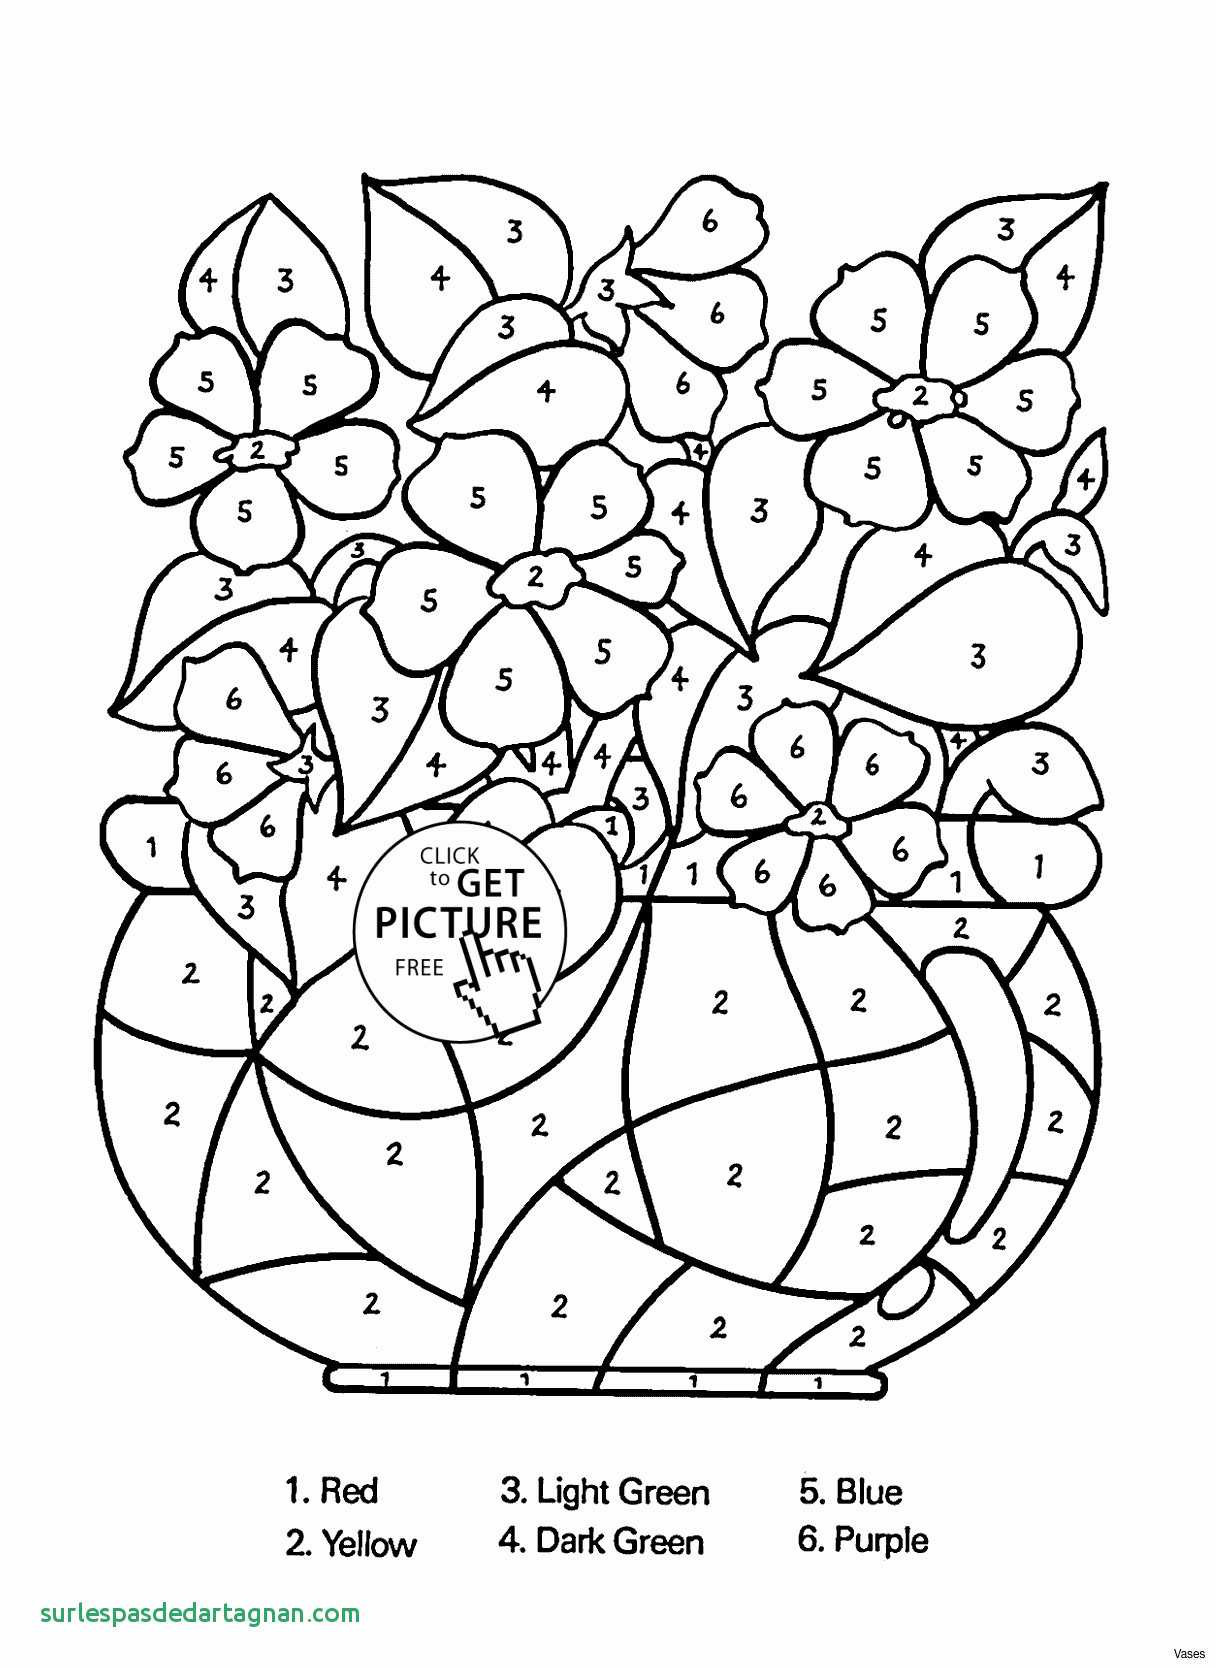 15 Wonderful Polka Dot Vase 2024 free download polka dot vase of stock of animal print vases vases artificial plants collection in animal print vases collection coloring page airplane free printable 2019 vases flower vase of stock of